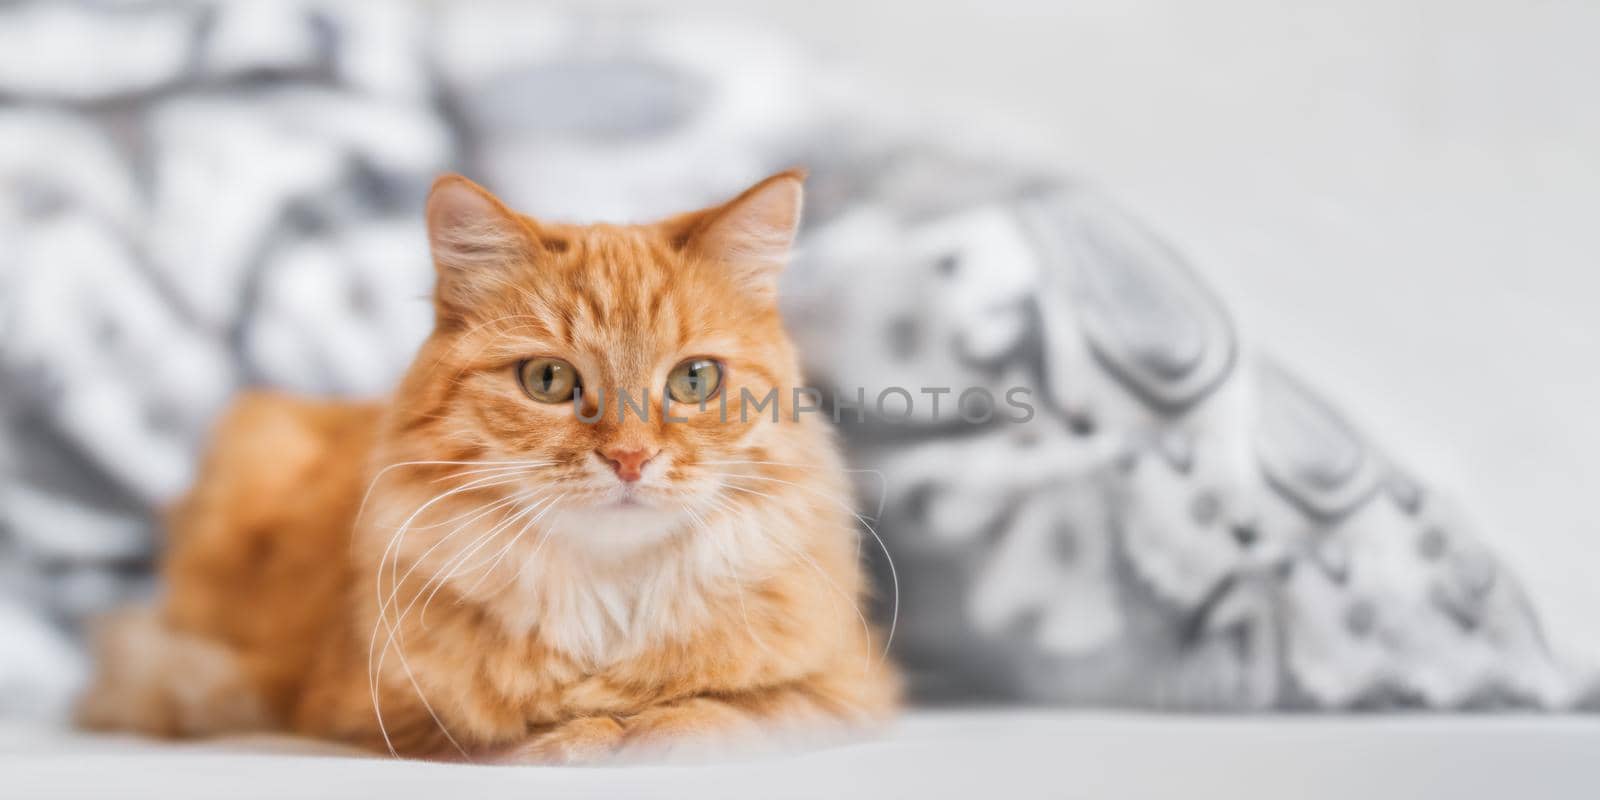 Cute ginger cat lying in bed. Fluffy pet comfortably settled to sleep. Cozy home background with copy space.